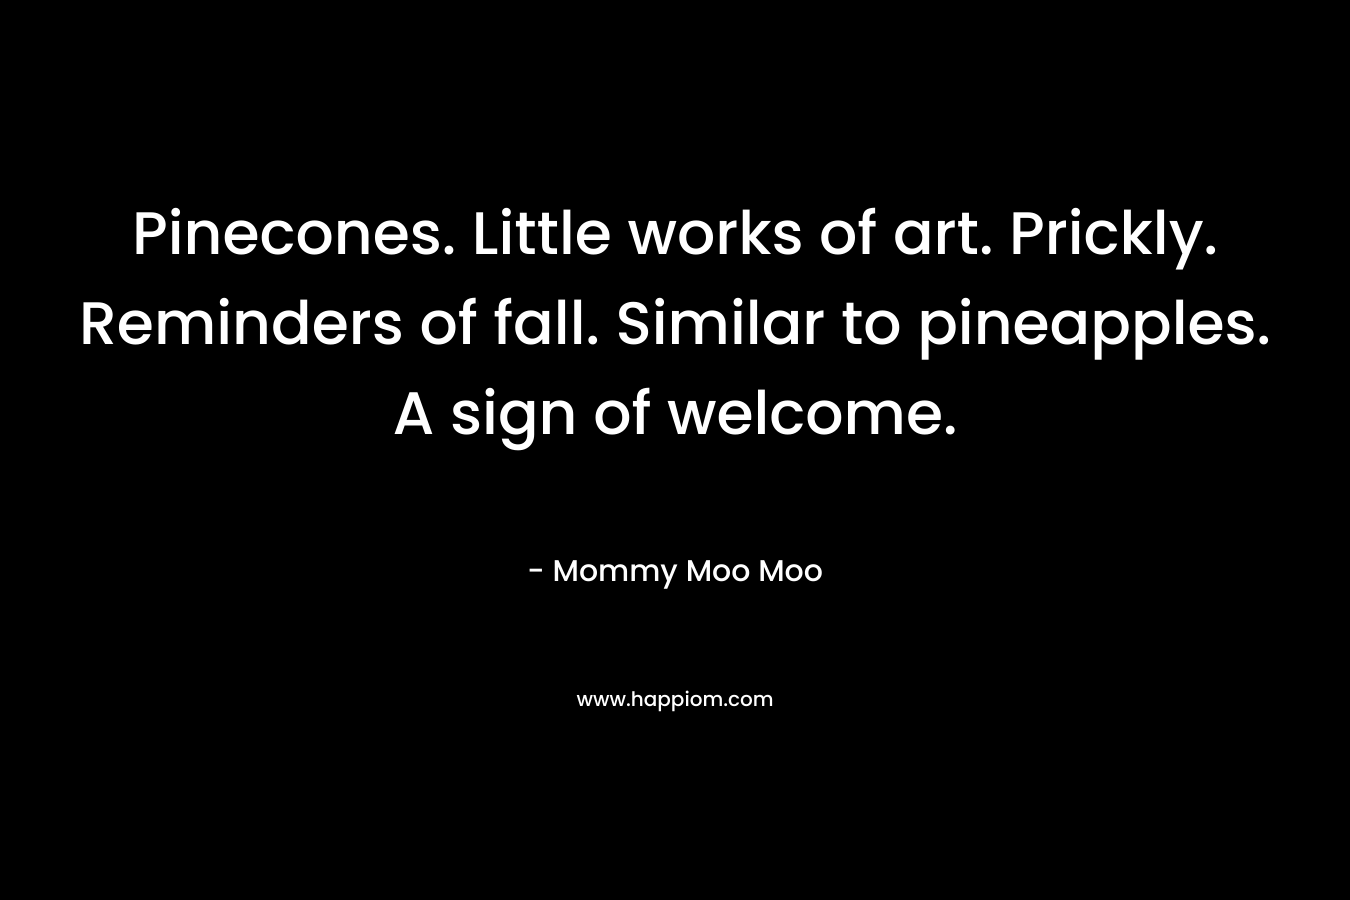 Pinecones. Little works of art. Prickly. Reminders of fall. Similar to pineapples. A sign of welcome. – Mommy Moo Moo